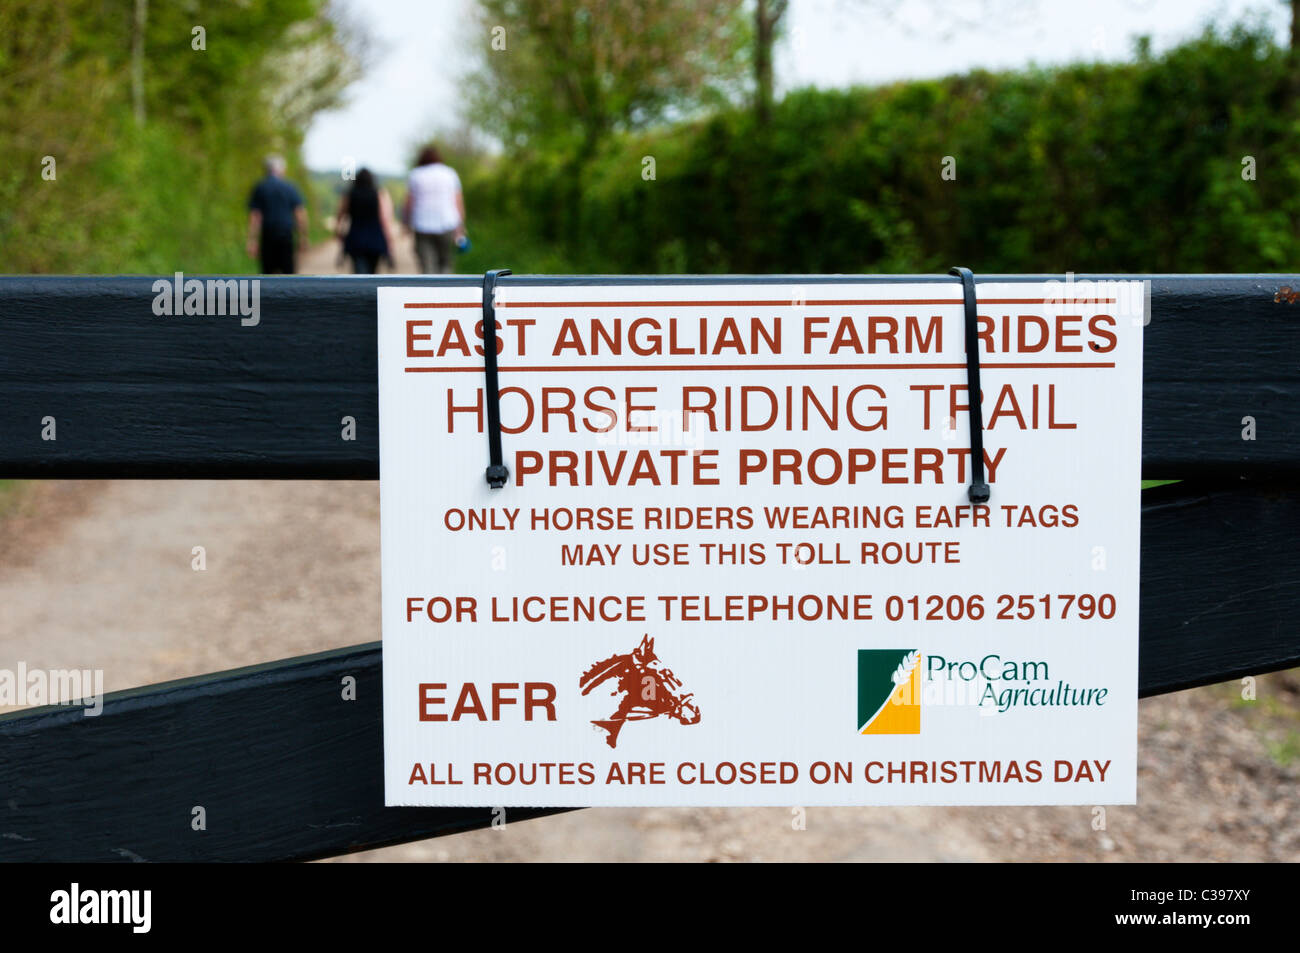 A toll route across Essex farmland to the north of Braintree only open to horse-riders wearing tags. Stock Photo